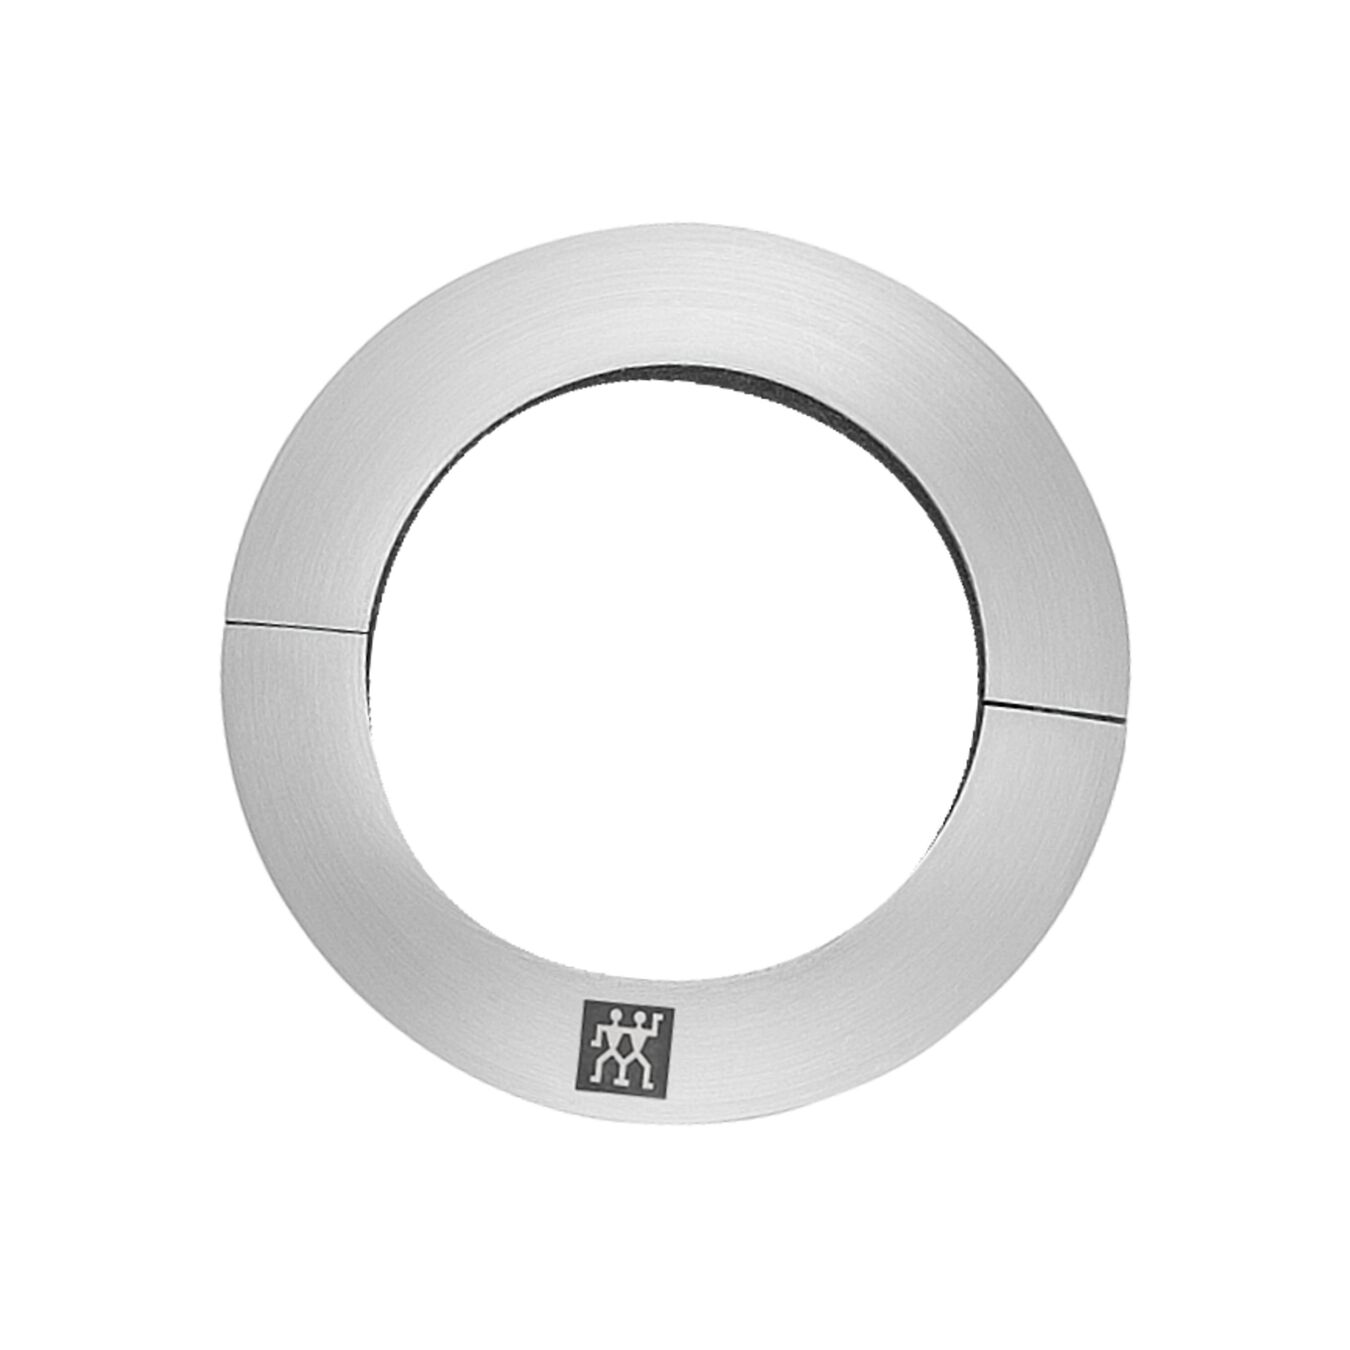 18/10 Stainless Steel, Drop ring,,large 1